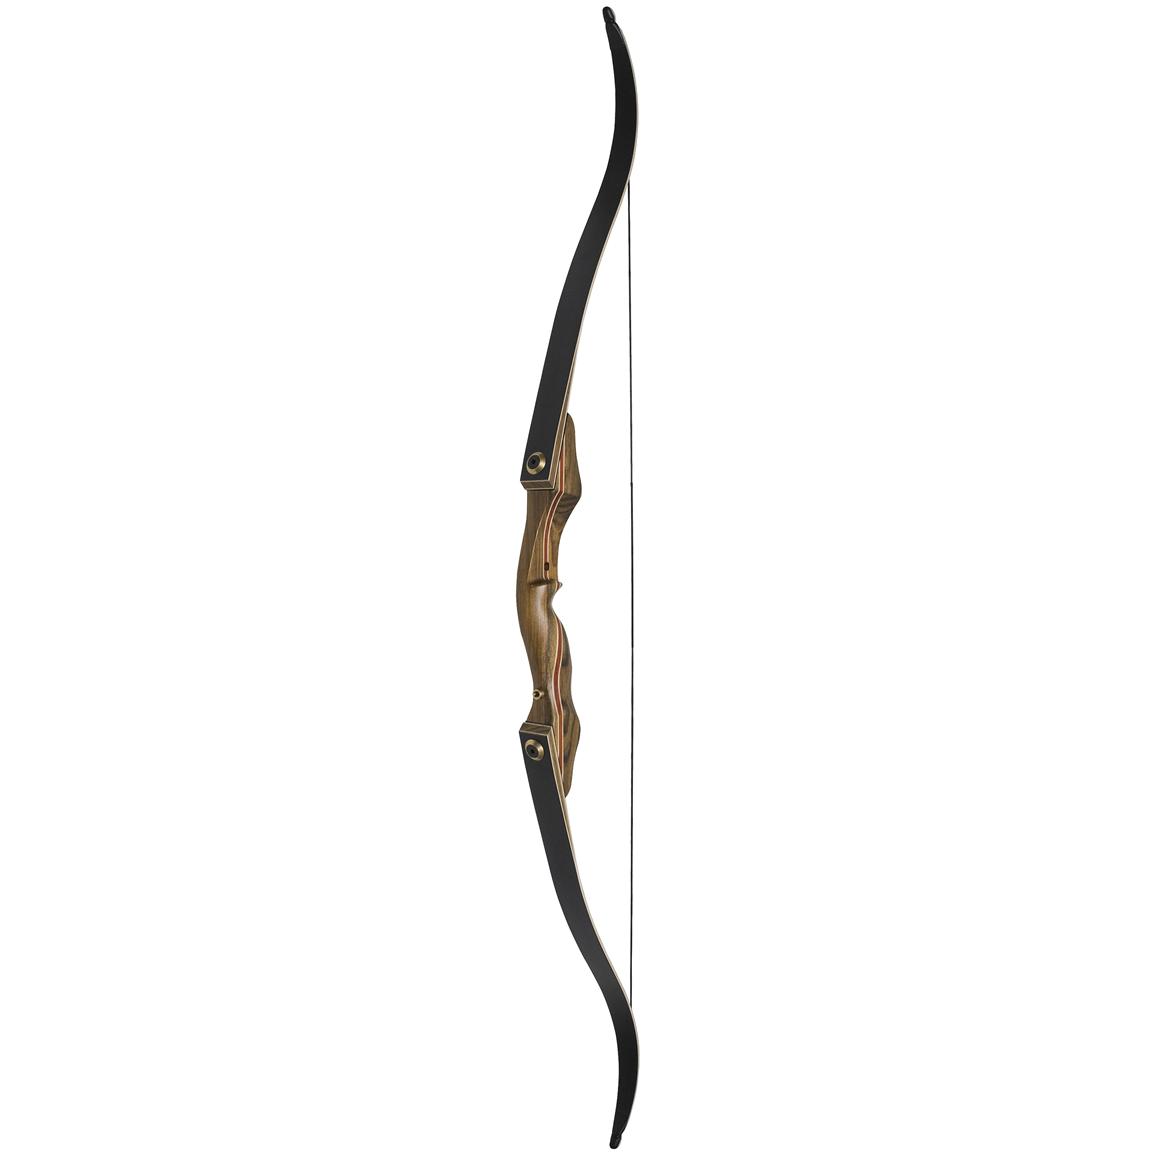 October Mountain Products™ Mountaineer 60" Takedown Recurve Bow, 50